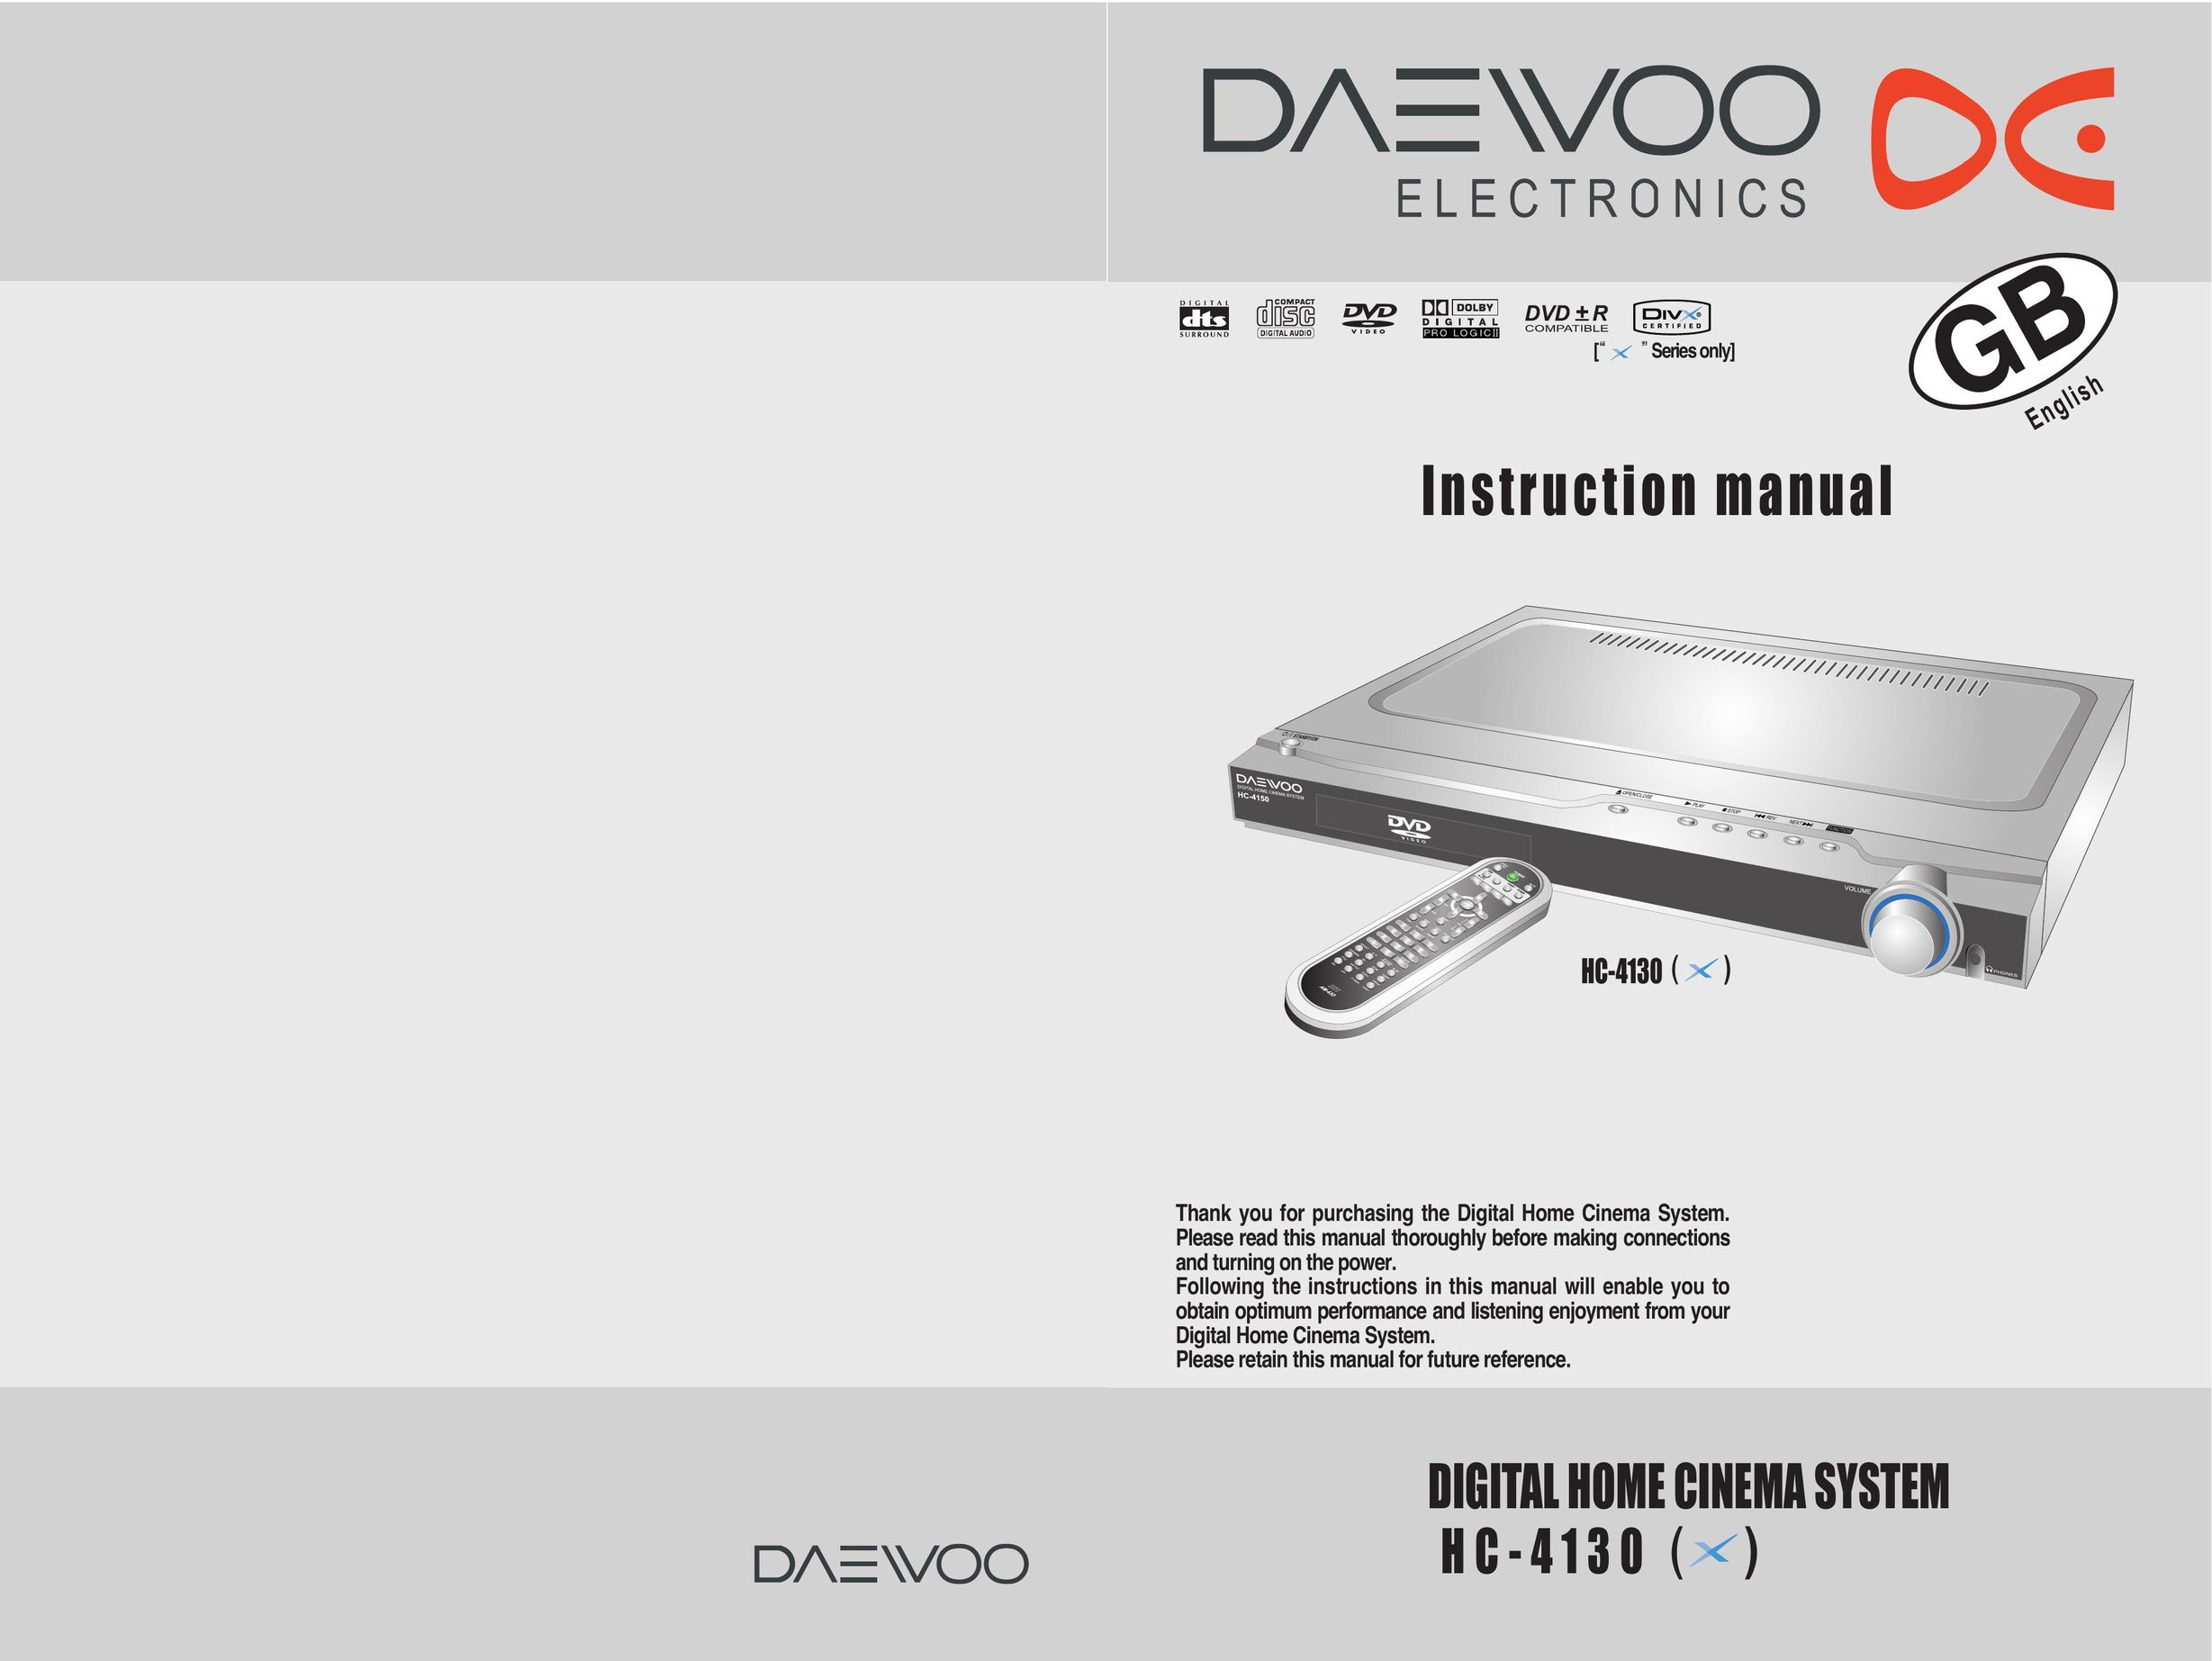 Daewoo HC-4130 Home Theater System User Manual